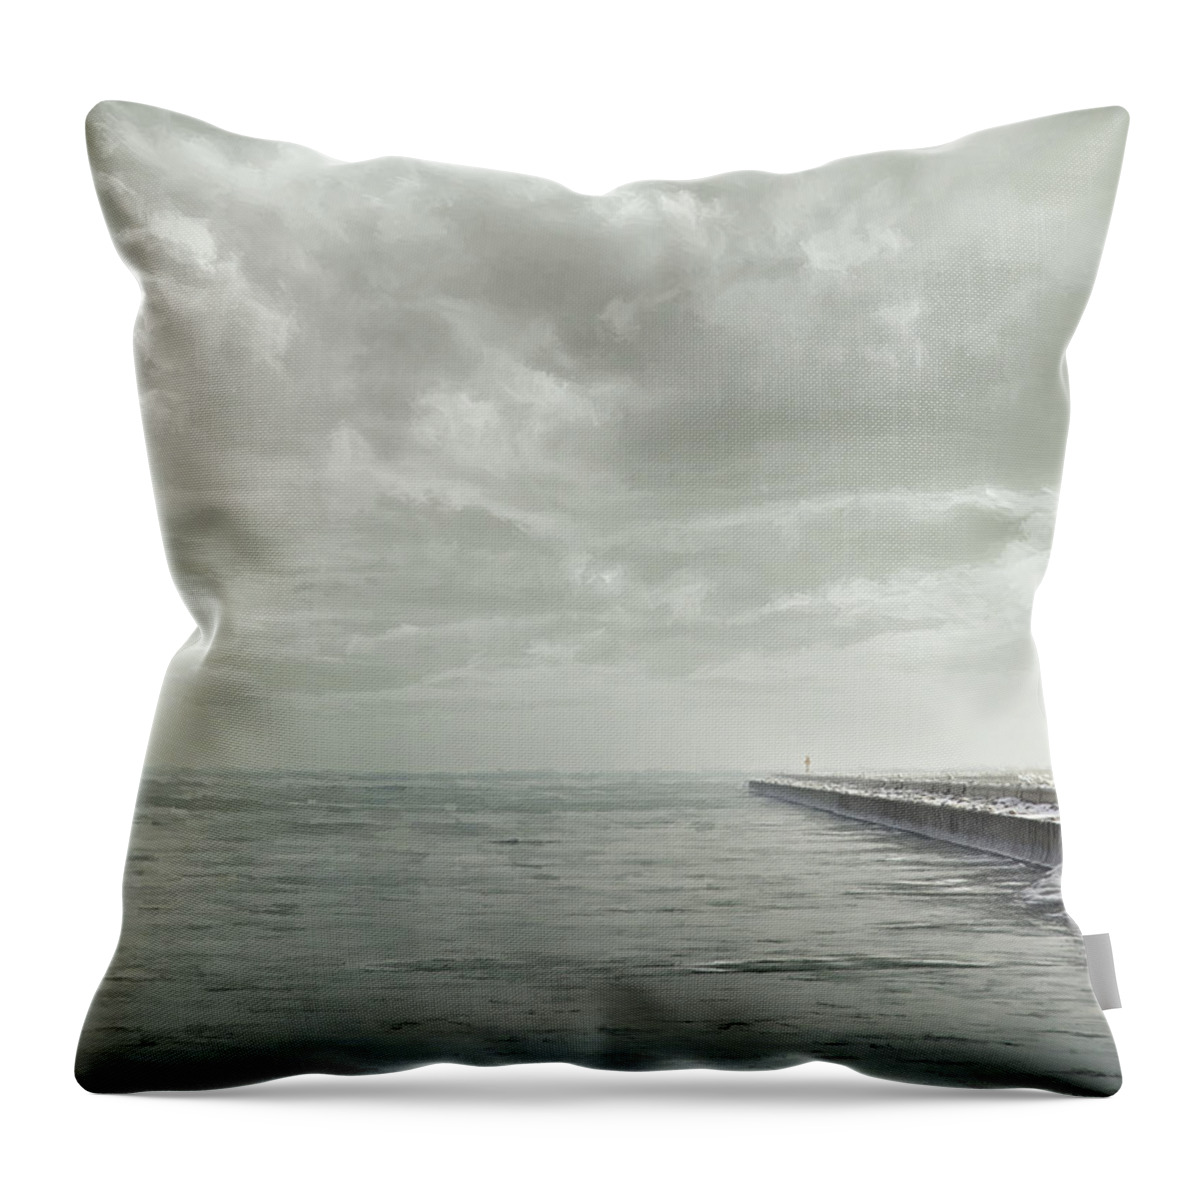 Lake Michigan Throw Pillow featuring the photograph Frozen Jetty by Scott Norris